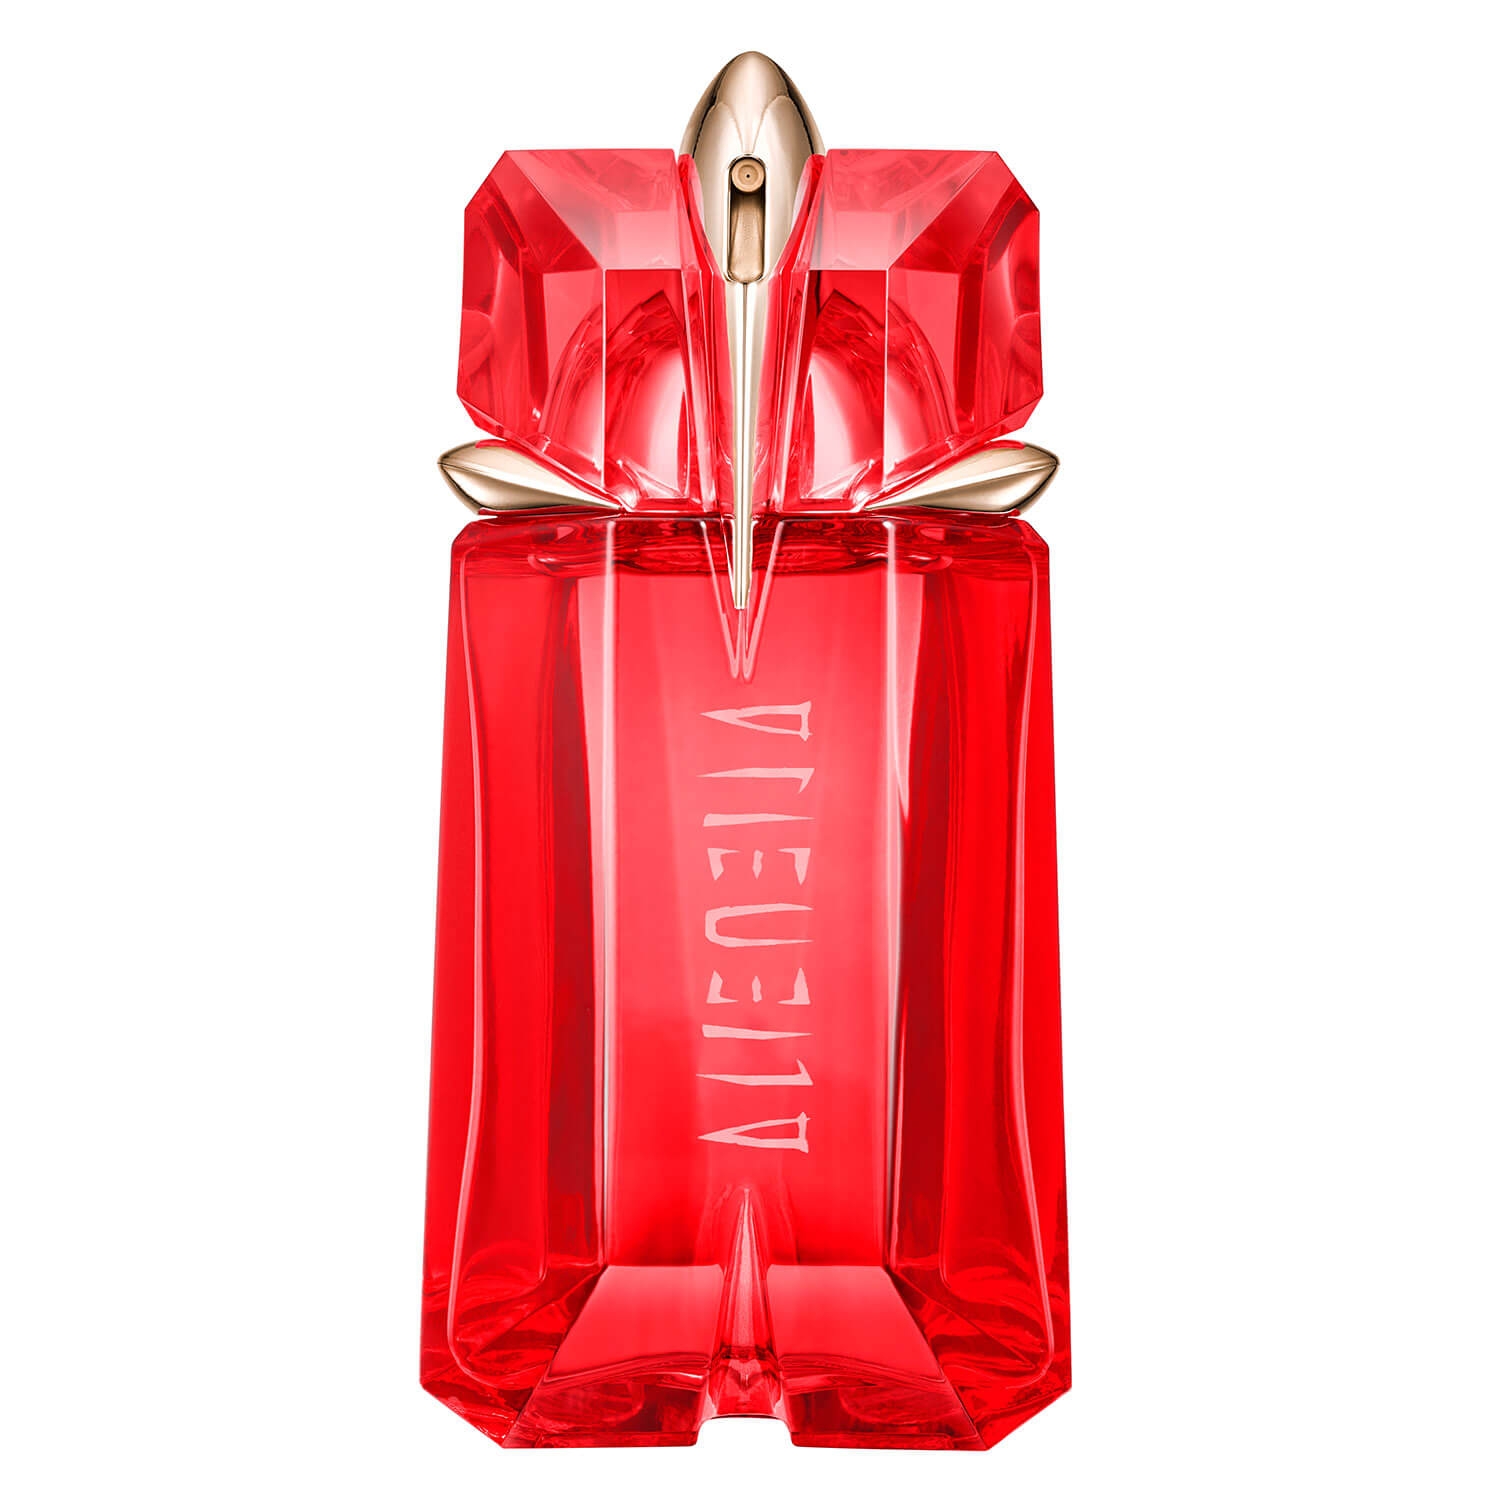 Product image from Alien - Fusion EdP